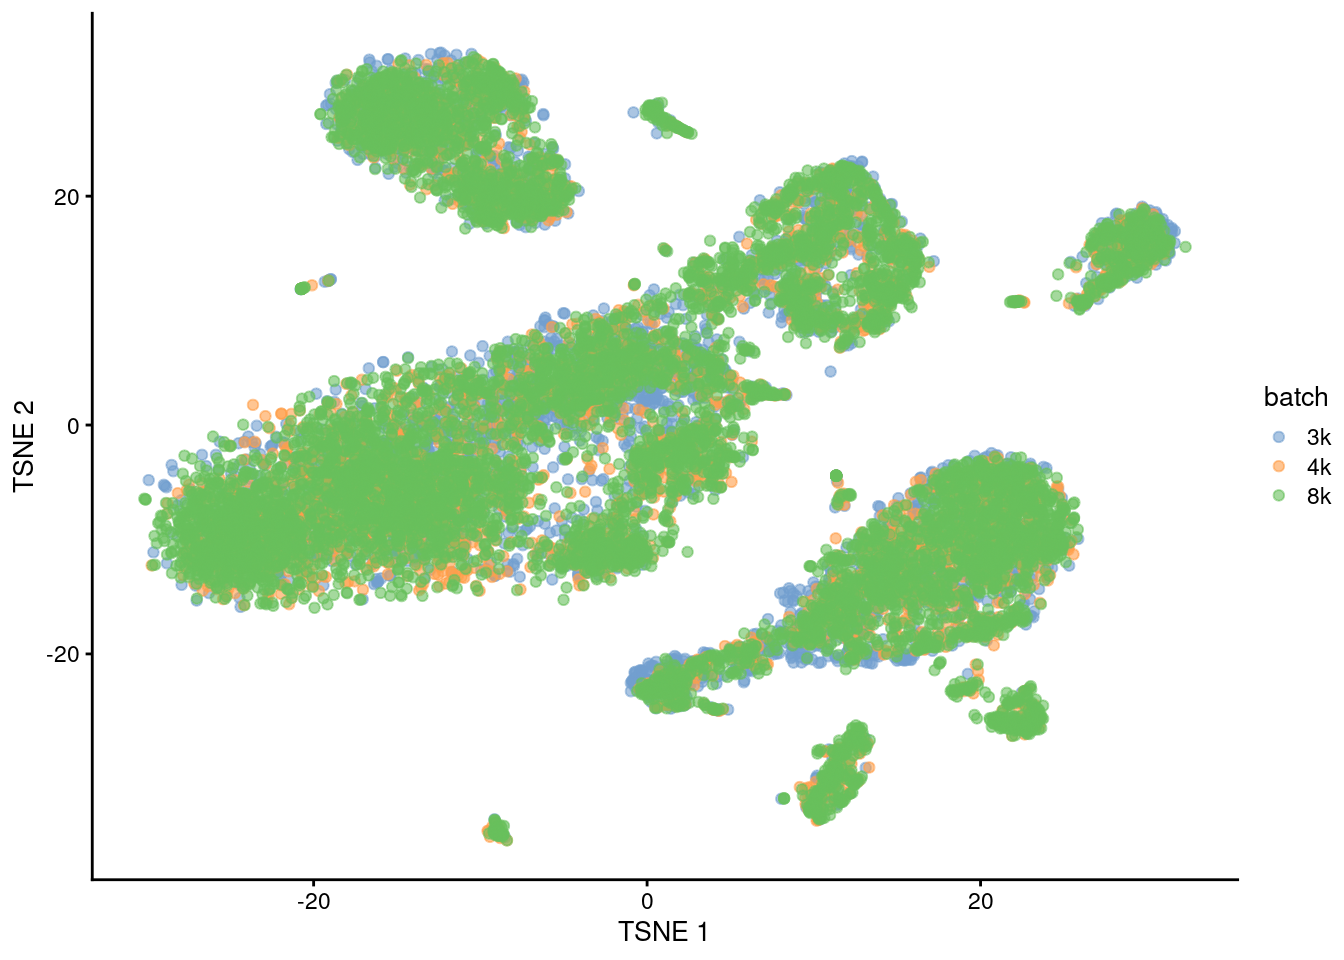 Yet another $t$-SNE plot of the PBMC datasets after MNN correction. Each point is a cell that is colored according to its batch of origin.